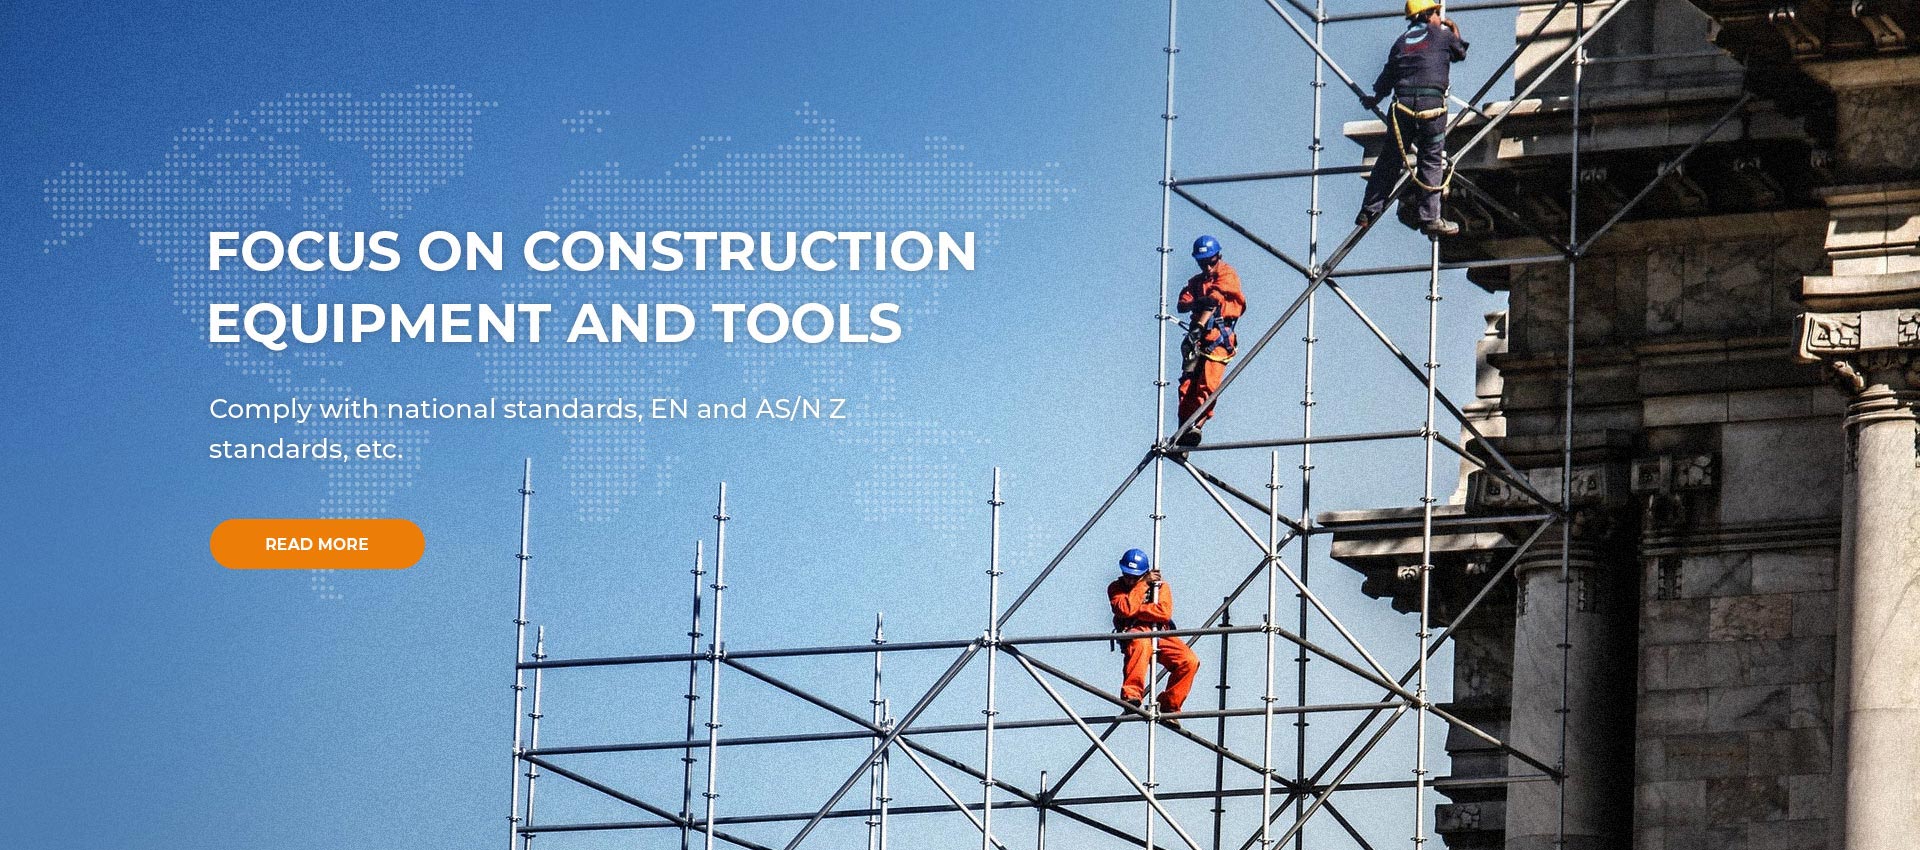 FOCUS ON CONSTRUCTION  EQUIPMENT AND TOOLS